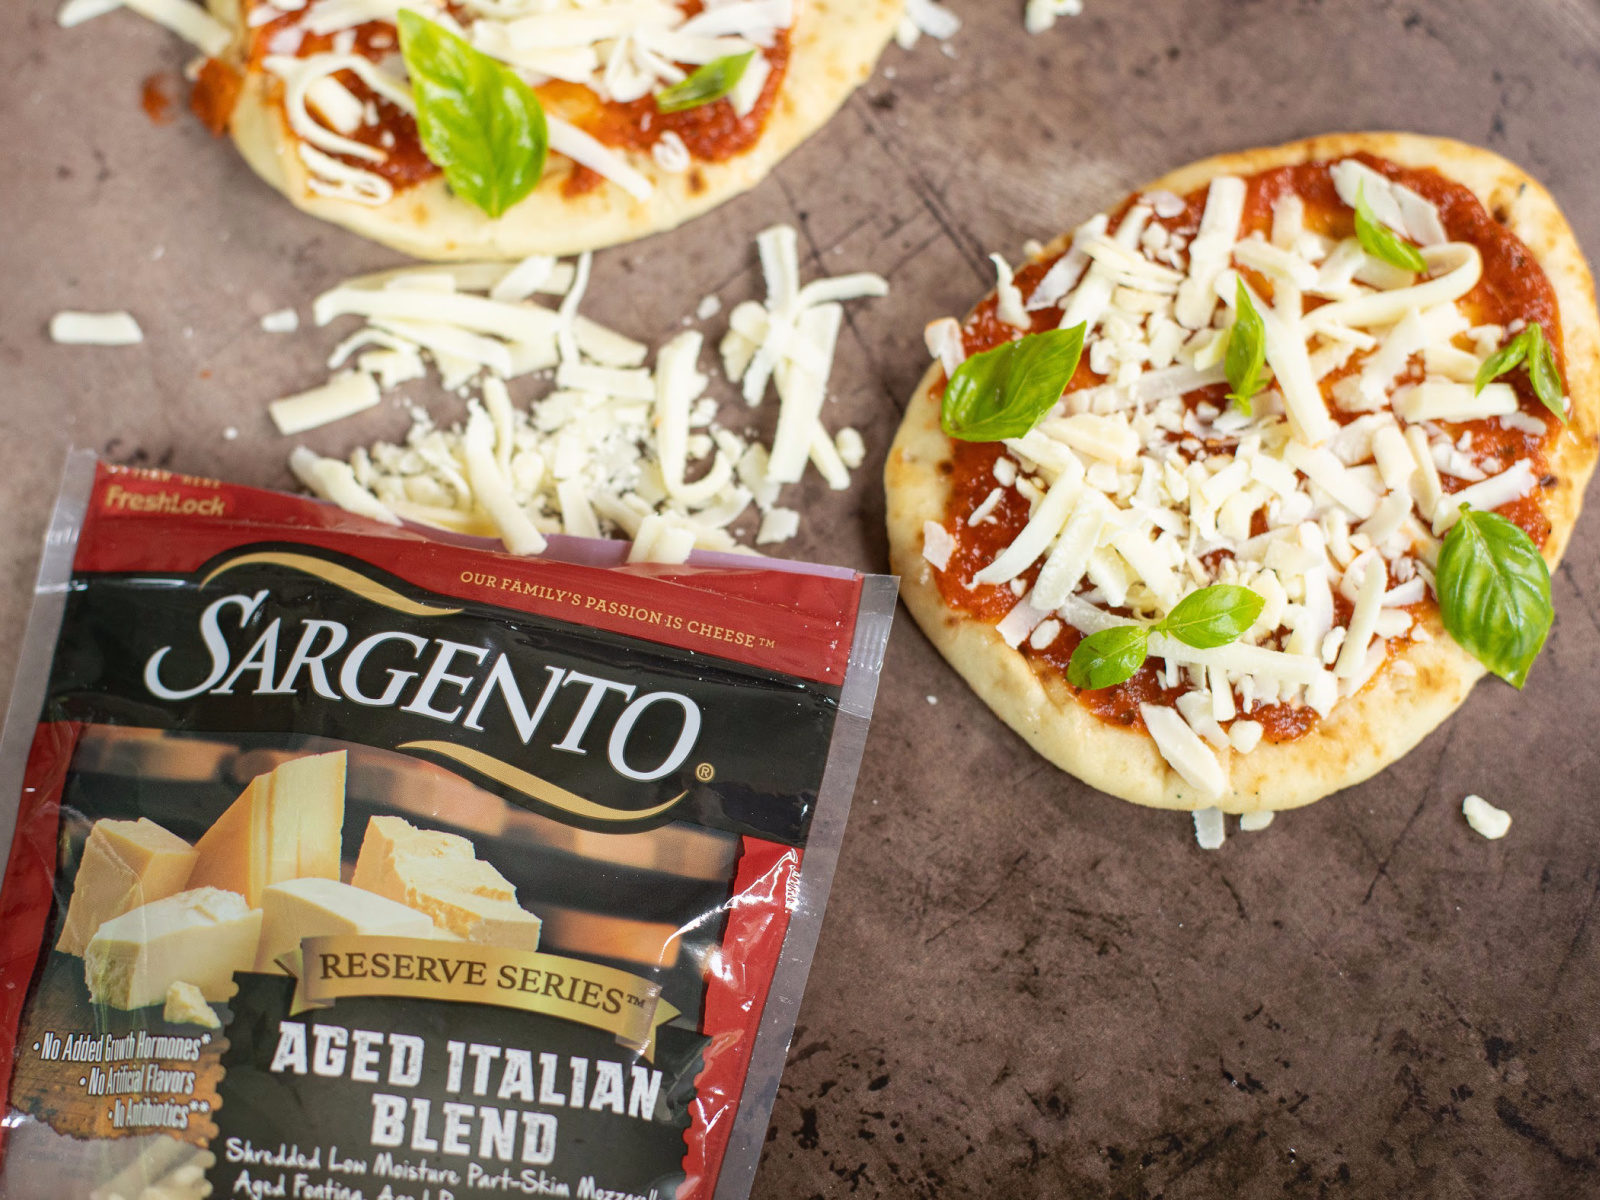 Sargento Reserve Series Shredded Cheese Is Just $2 At Publix on I Heart Publix 1